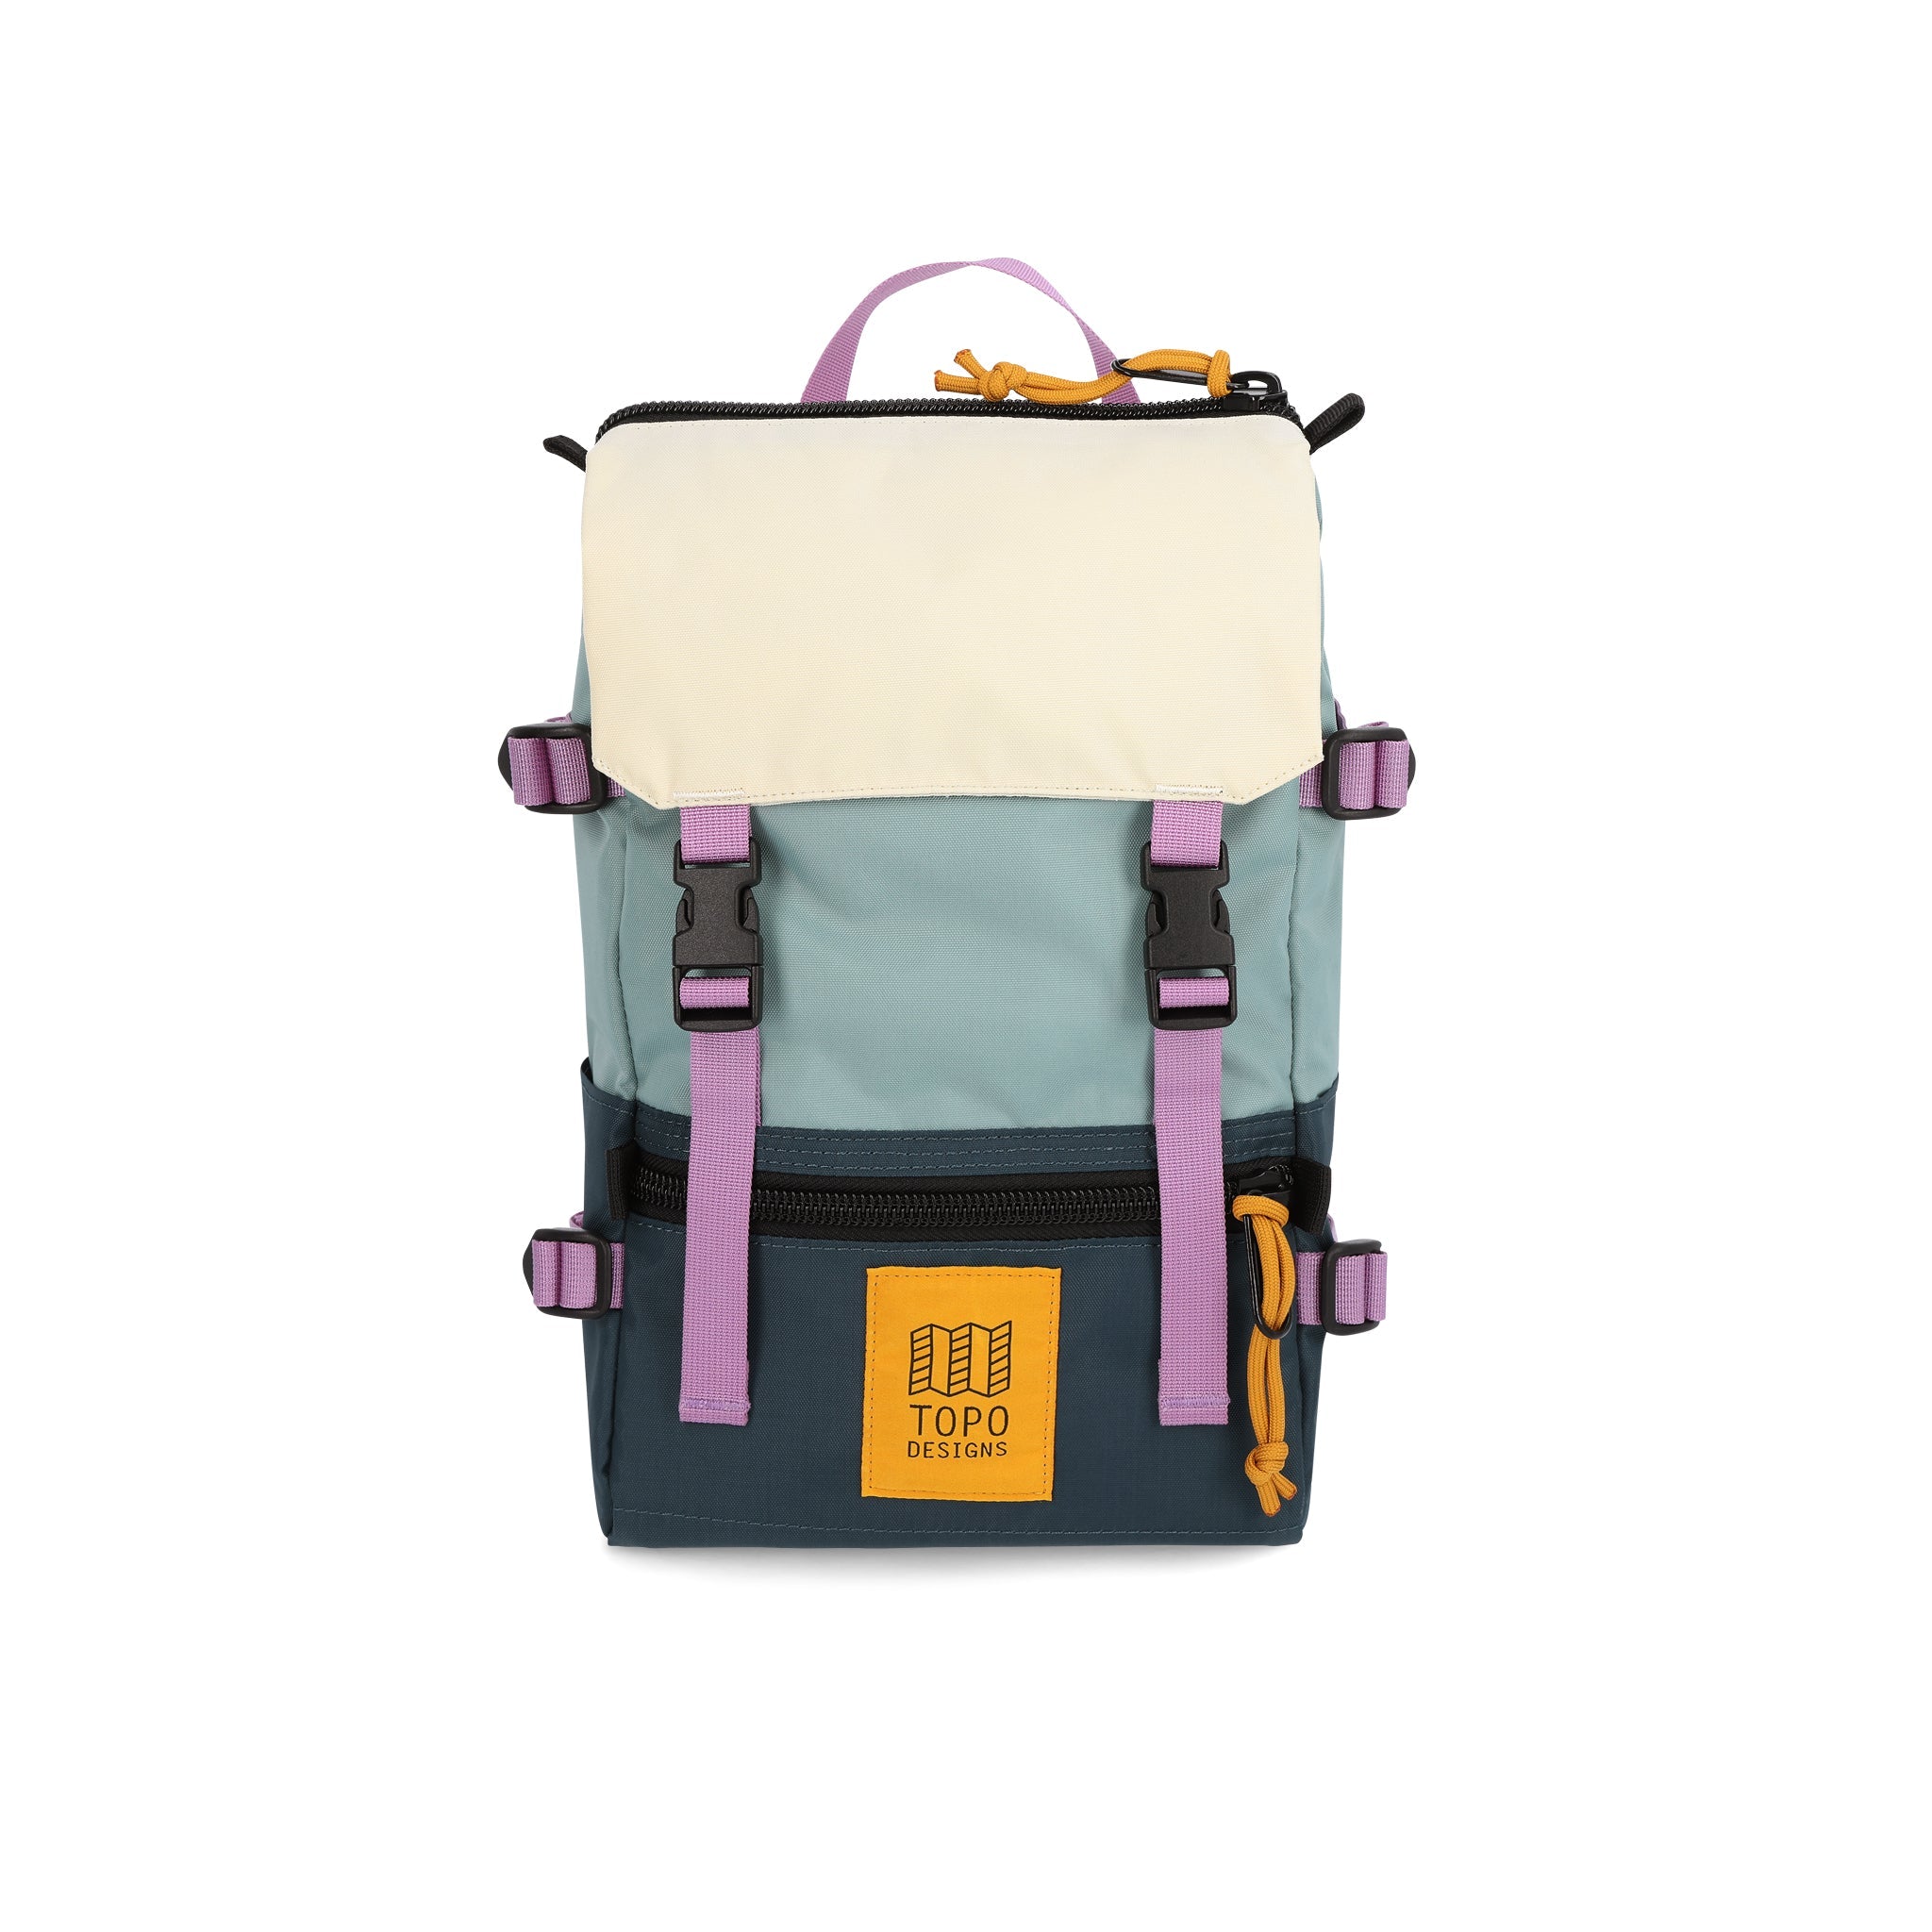 Topo Designs Rover Pack Mini backpack in "Pond Blue / Sage".